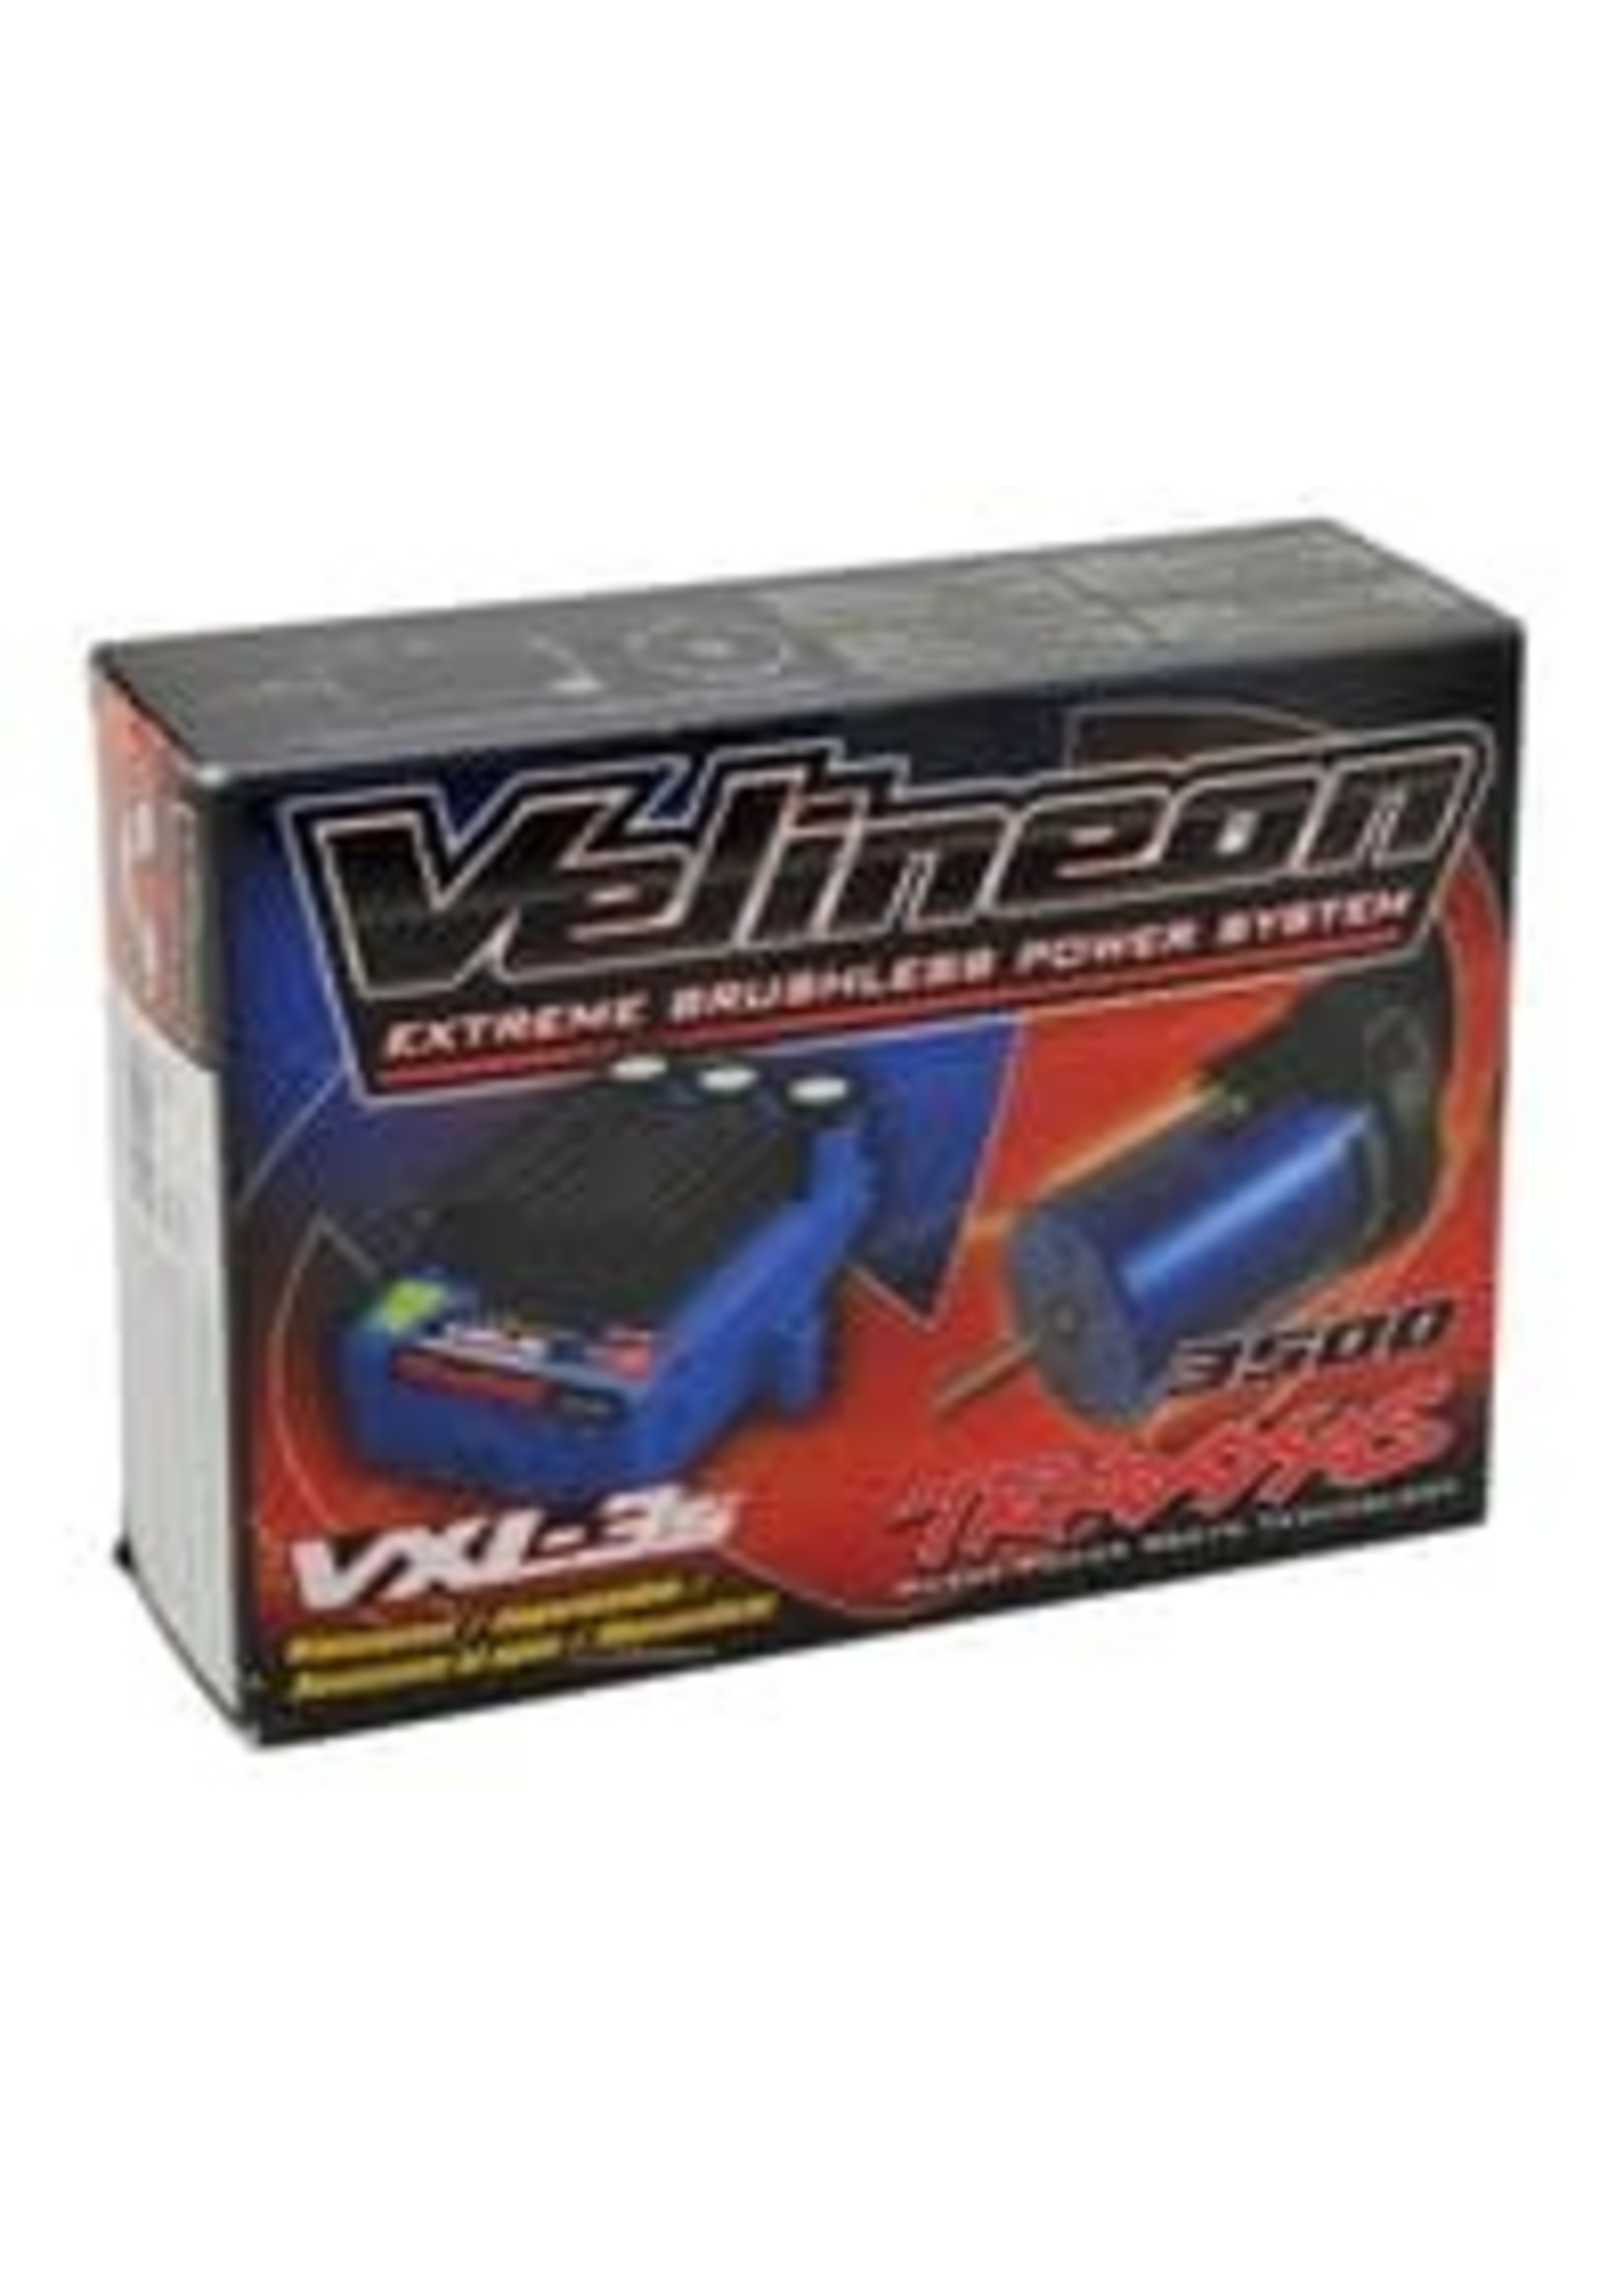 Traxxas 3350R Velineon VXL-3s Brushless Power System, waterproof (includes VXL-3s waterproof ESC, Velineon 3500 motor, and speed control mounting plate (part #3725R))